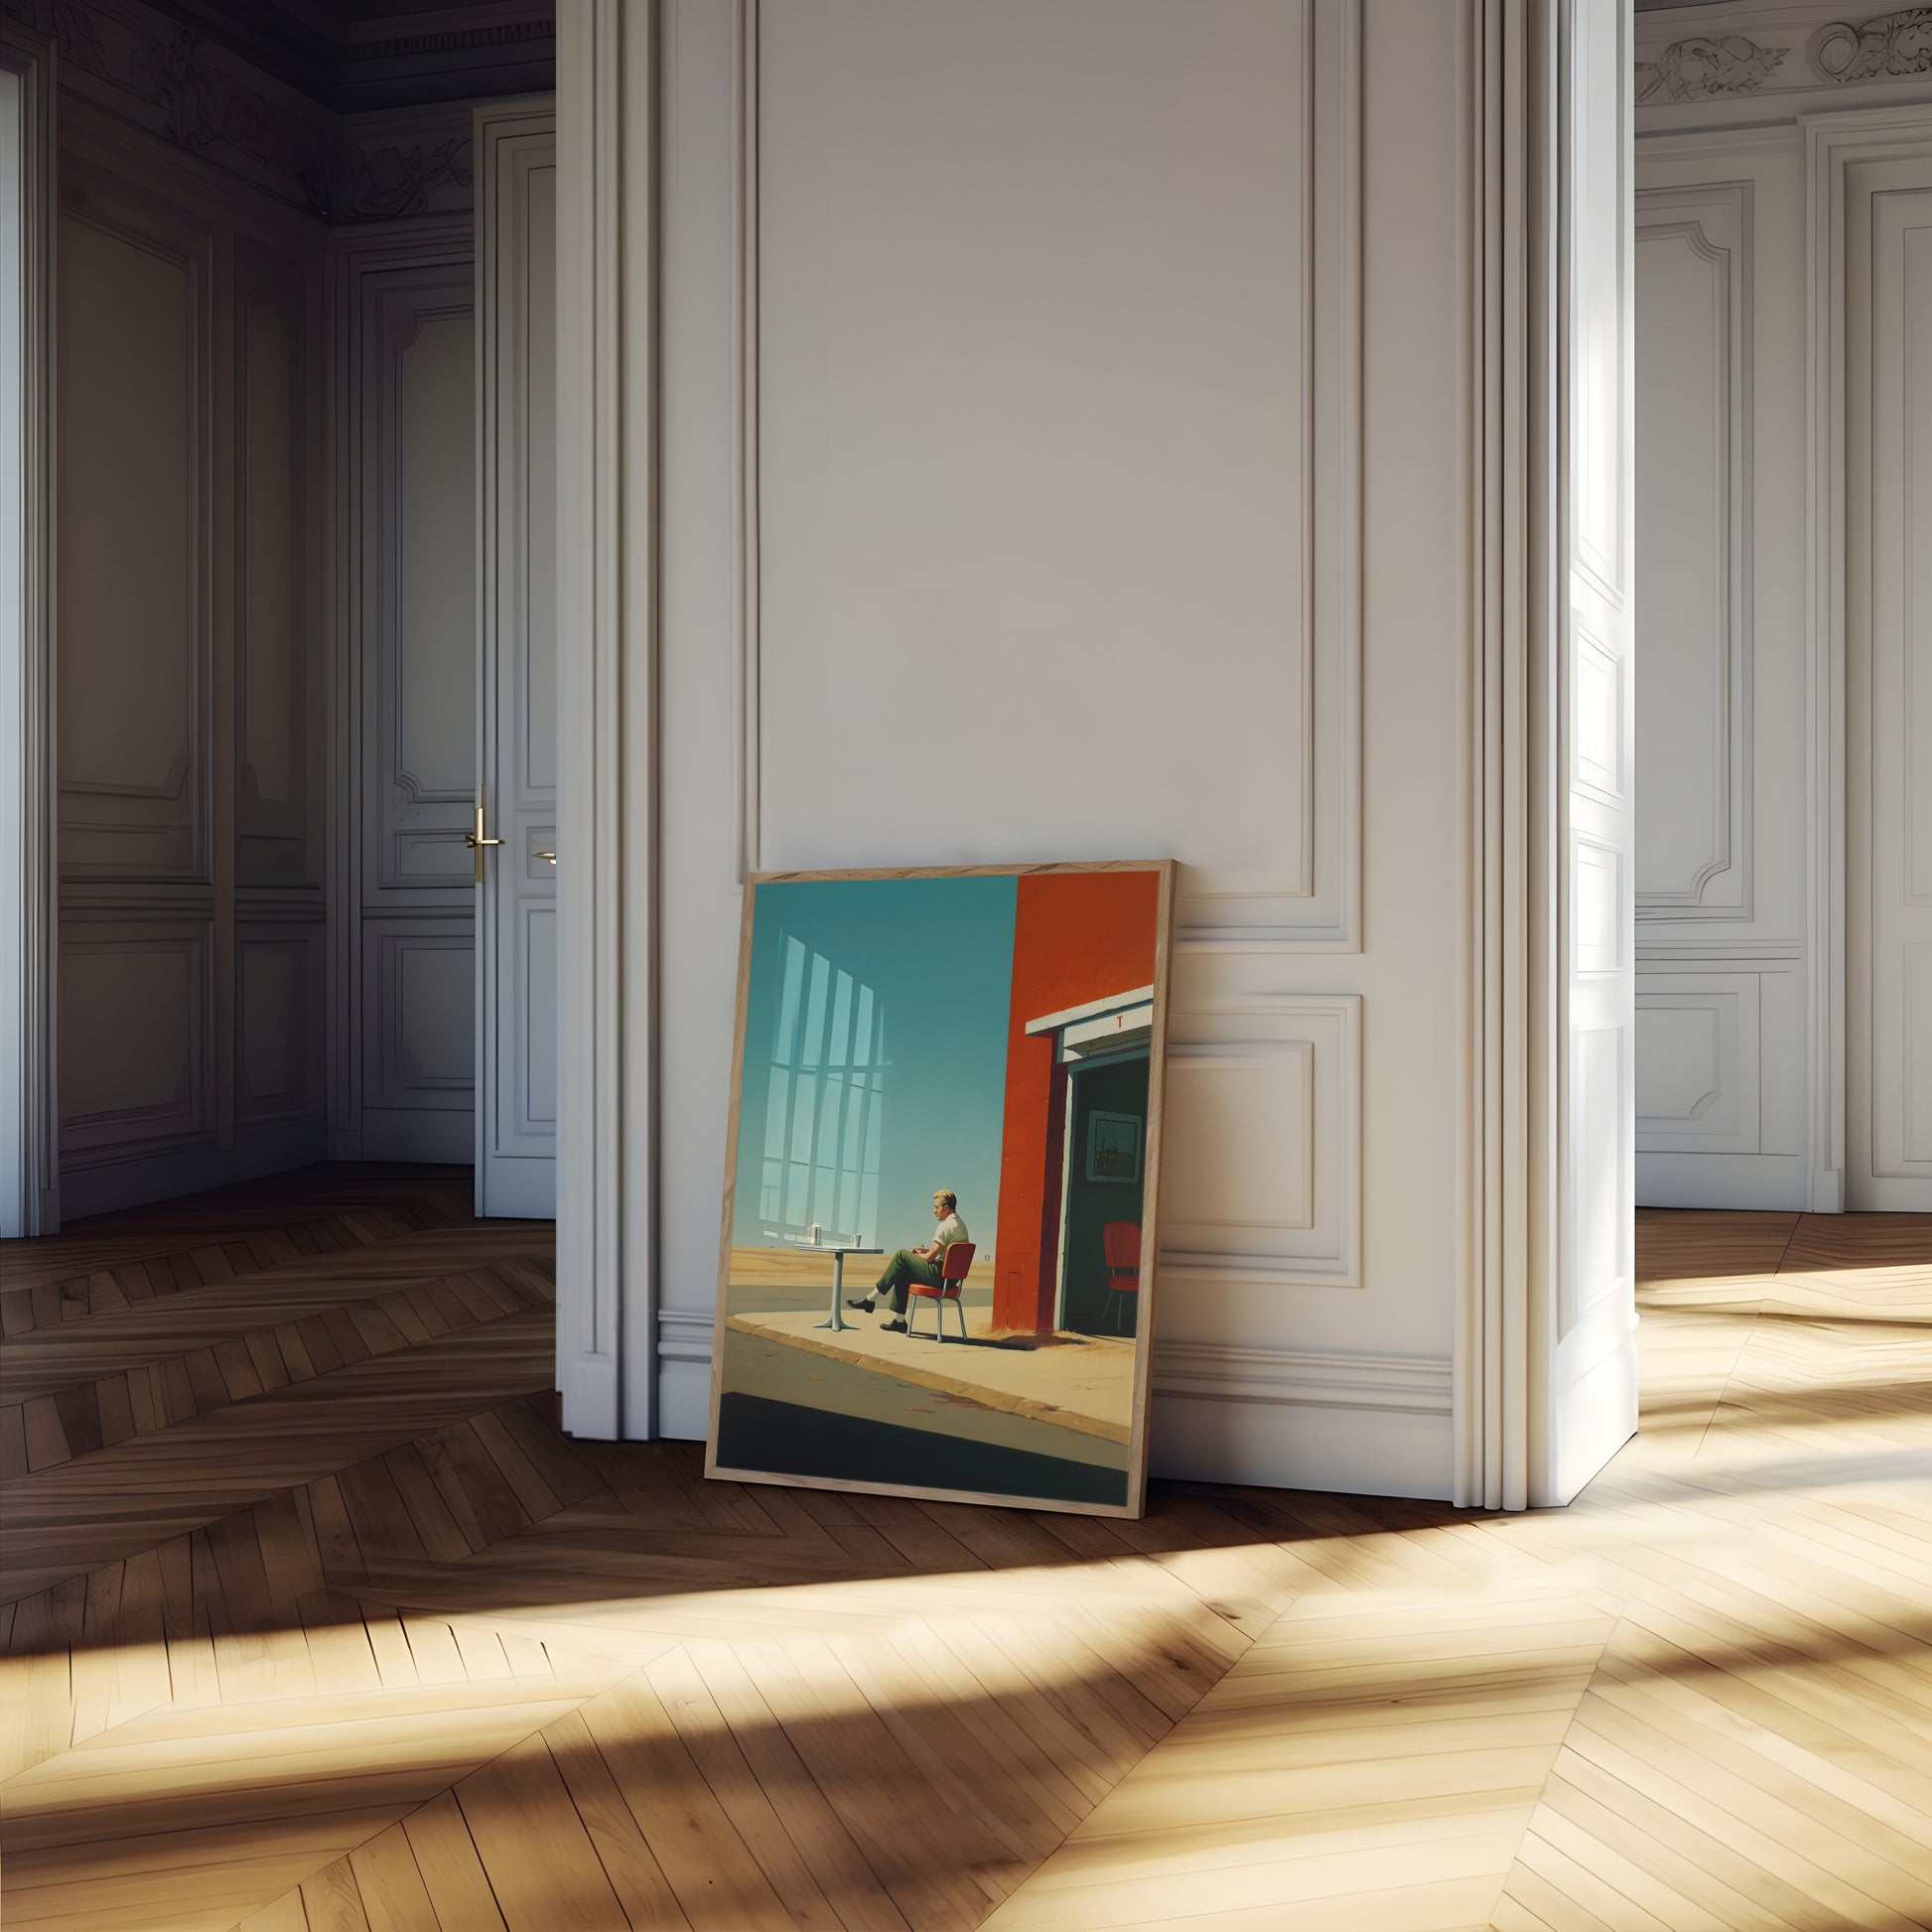 An illustration of a painting leaning against the wall in a sunlit, classic room.